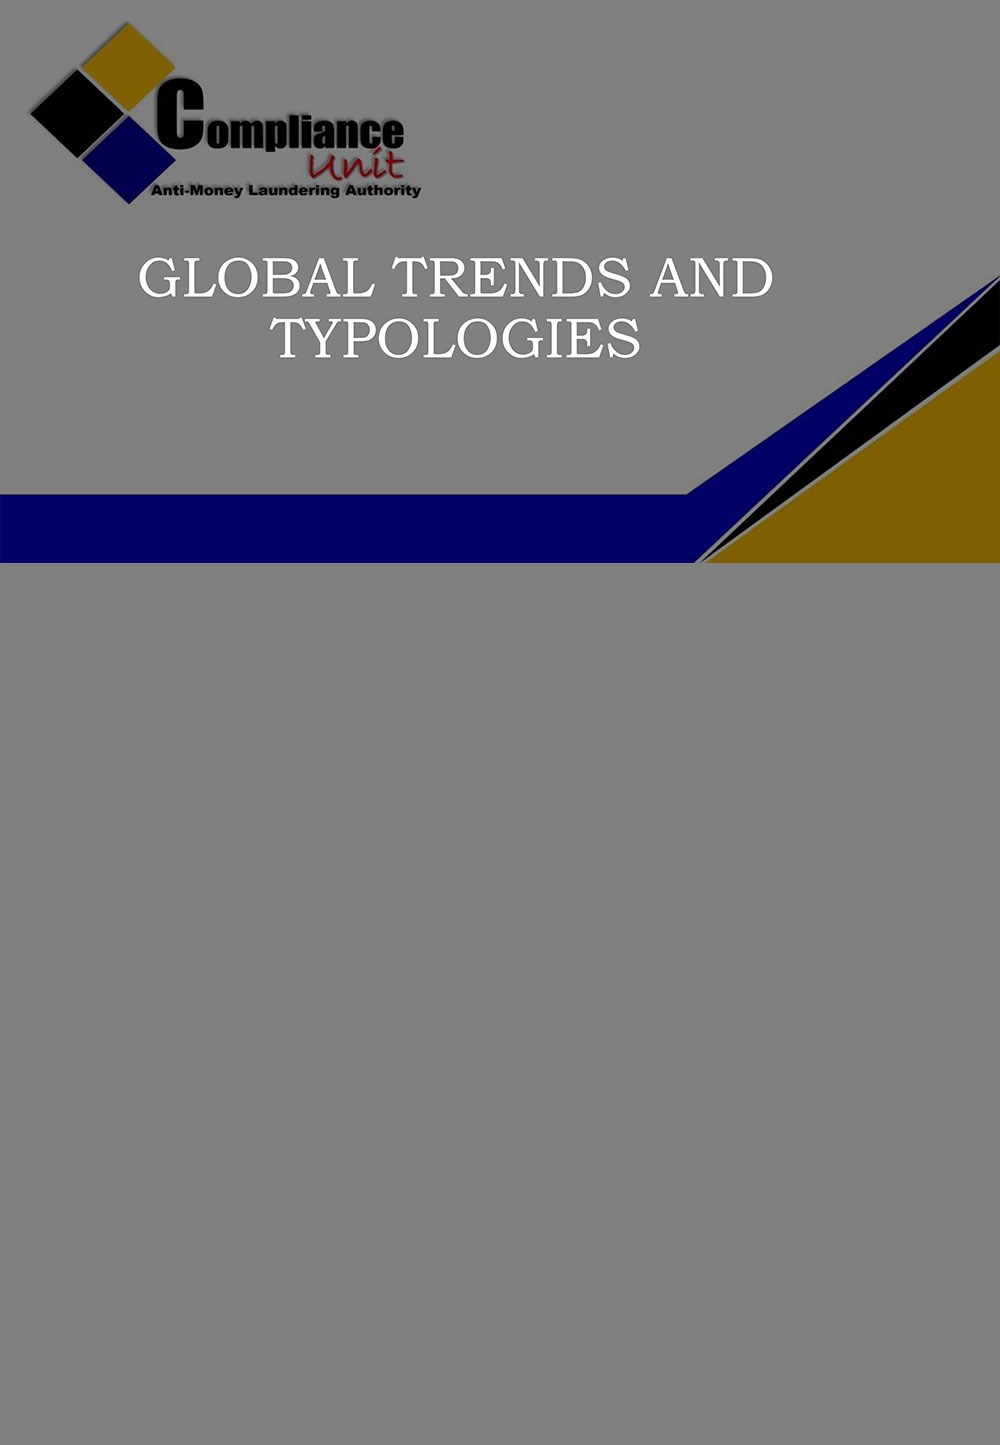 Global Trends & Typologies for 2023